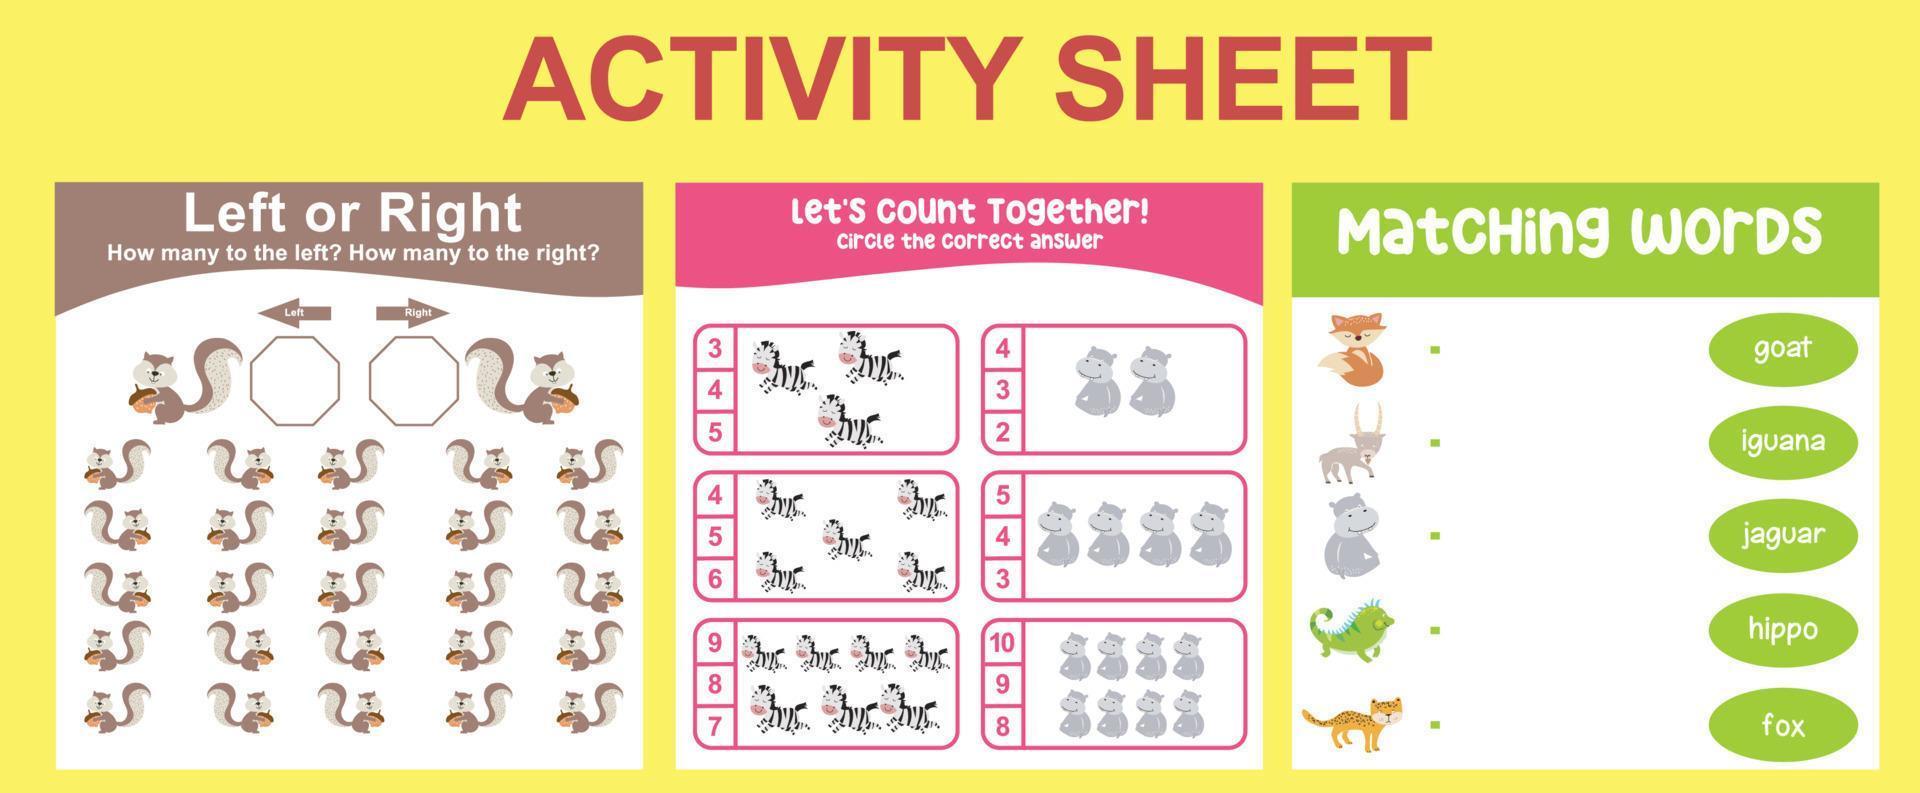 Educational printable worksheet. Activity sheet for children with animal theme. Counting left or right, counting worksheet, matching words worksheet. Vector file.